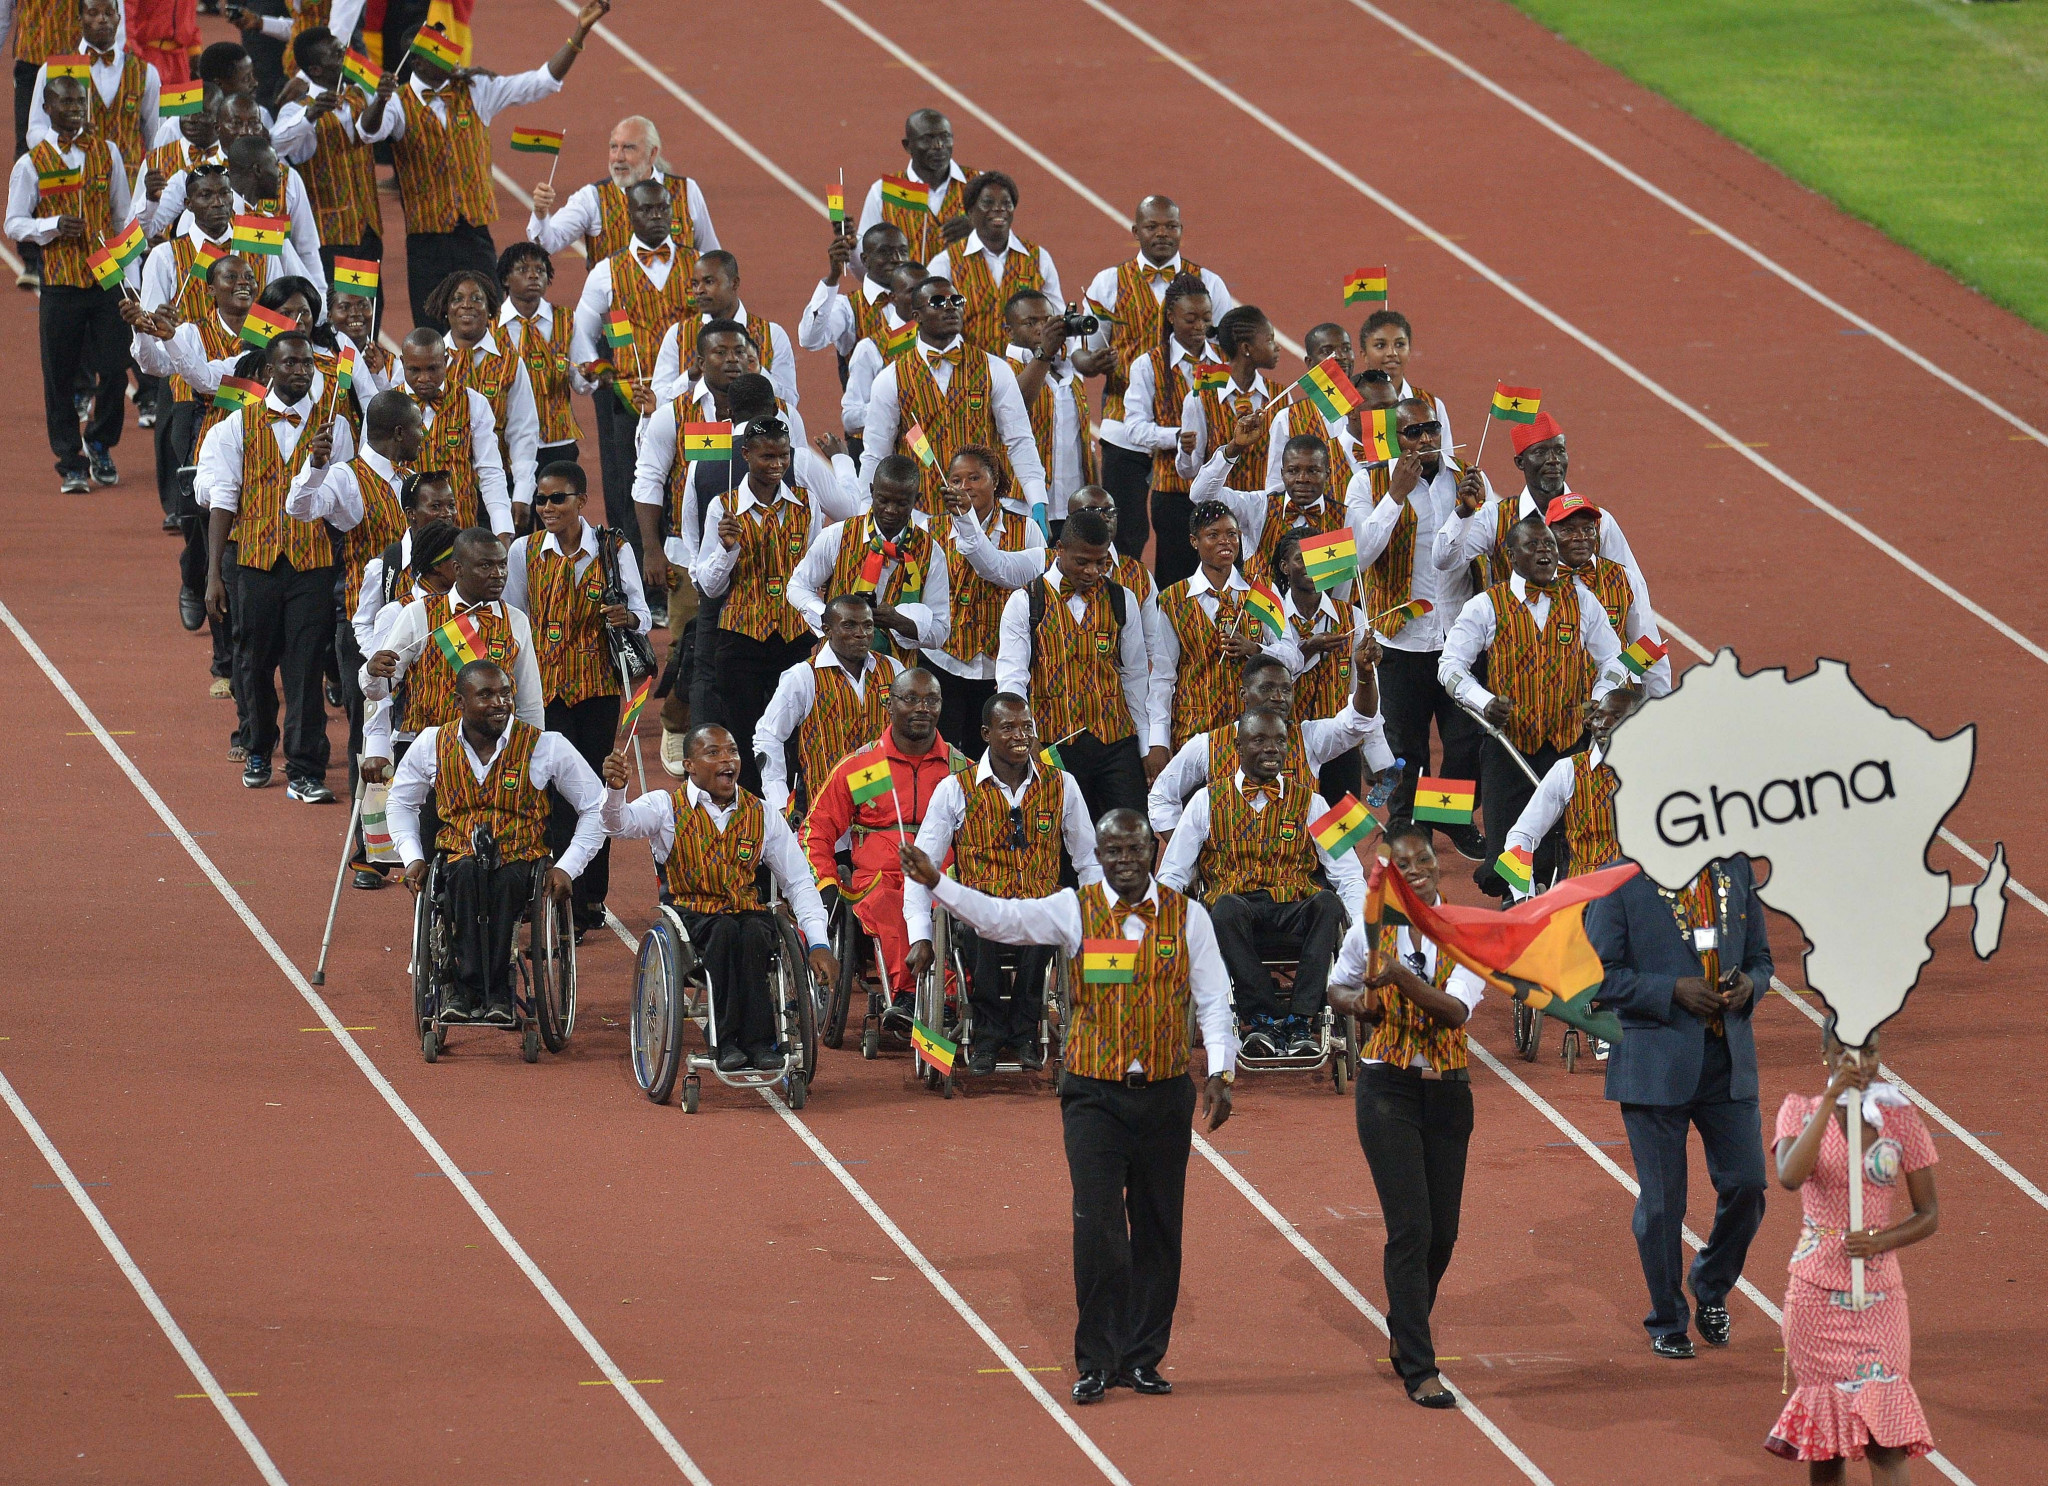 Ghana is set to host the African Games for the first time, but the multi-sport event has been postponed until next year, partly due to the country's economic crisis ©Getty Images